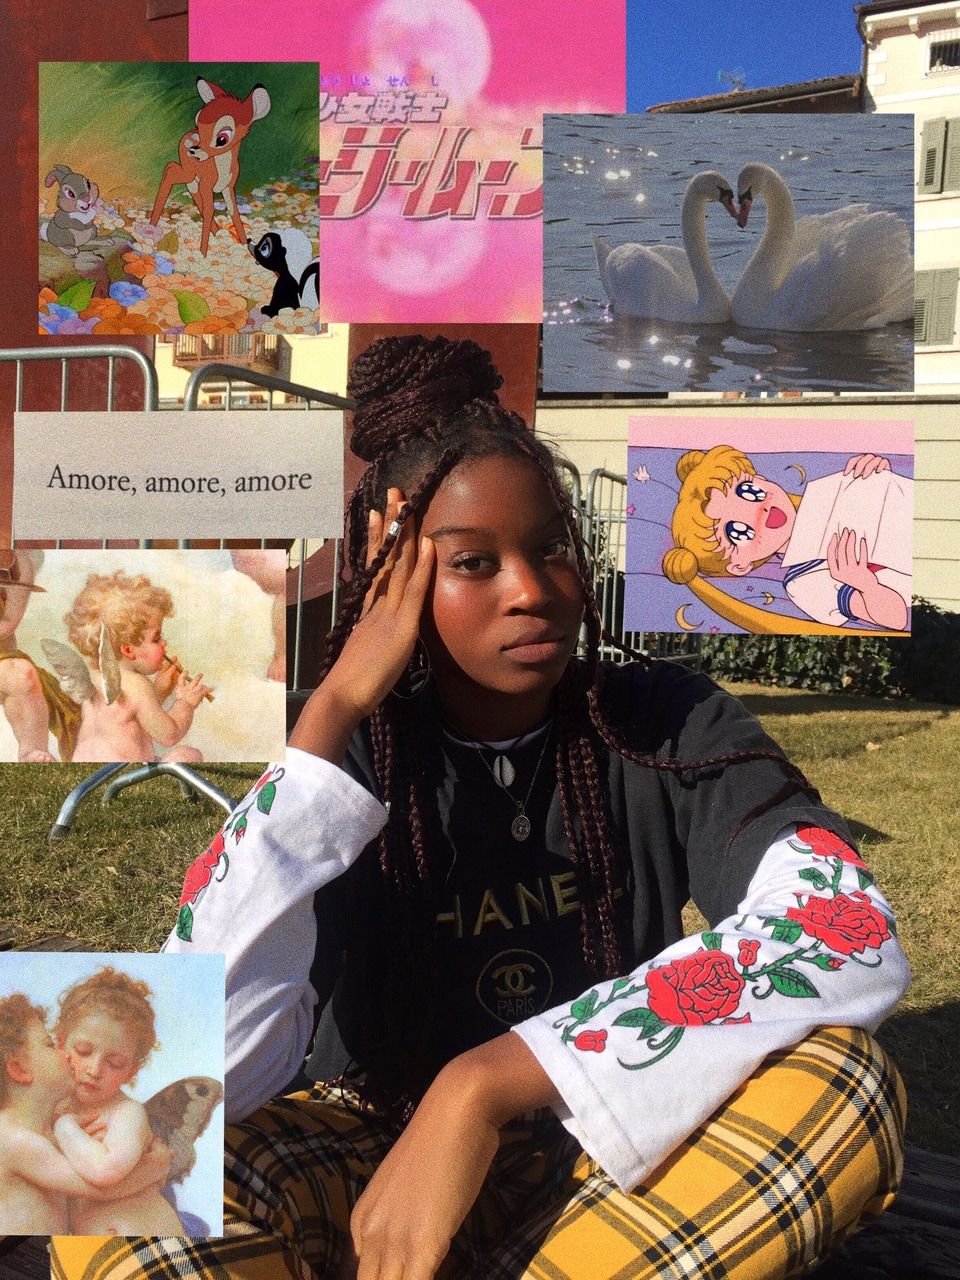 image about Black Girl Magic Aesthetic. See more about melanin, beauty and black girl magic